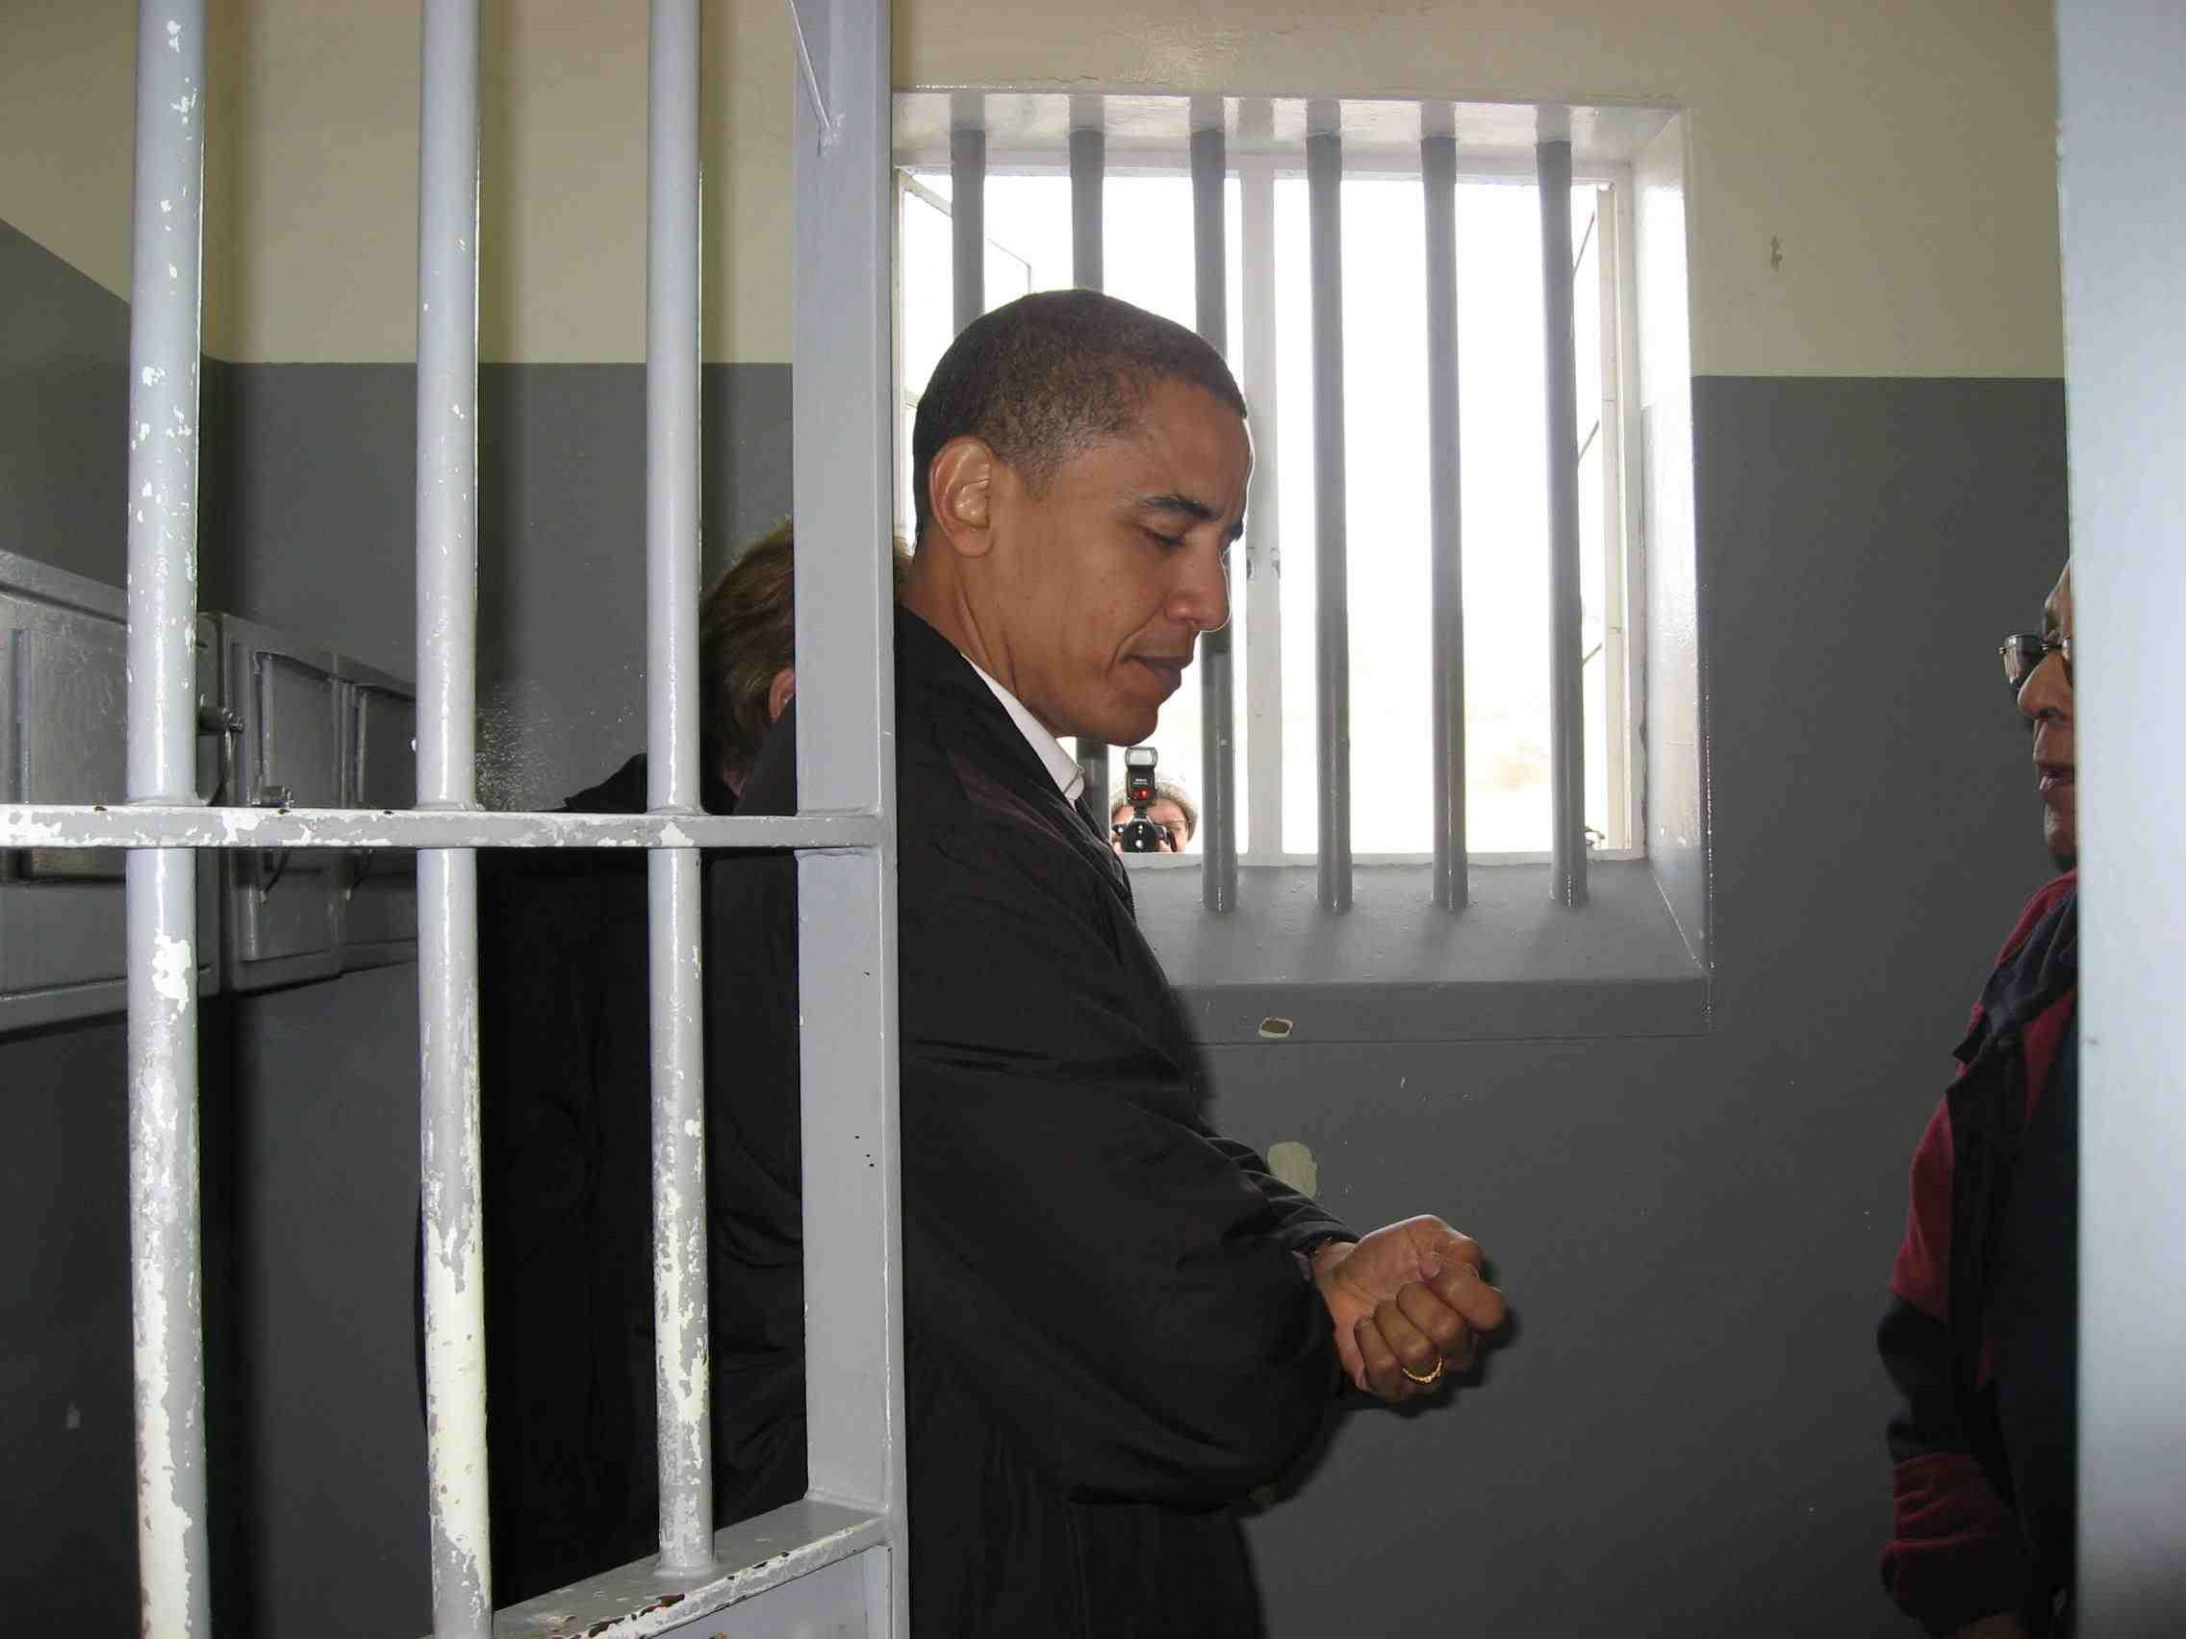 High Quality Obama in jail cell meme Blank Meme Template